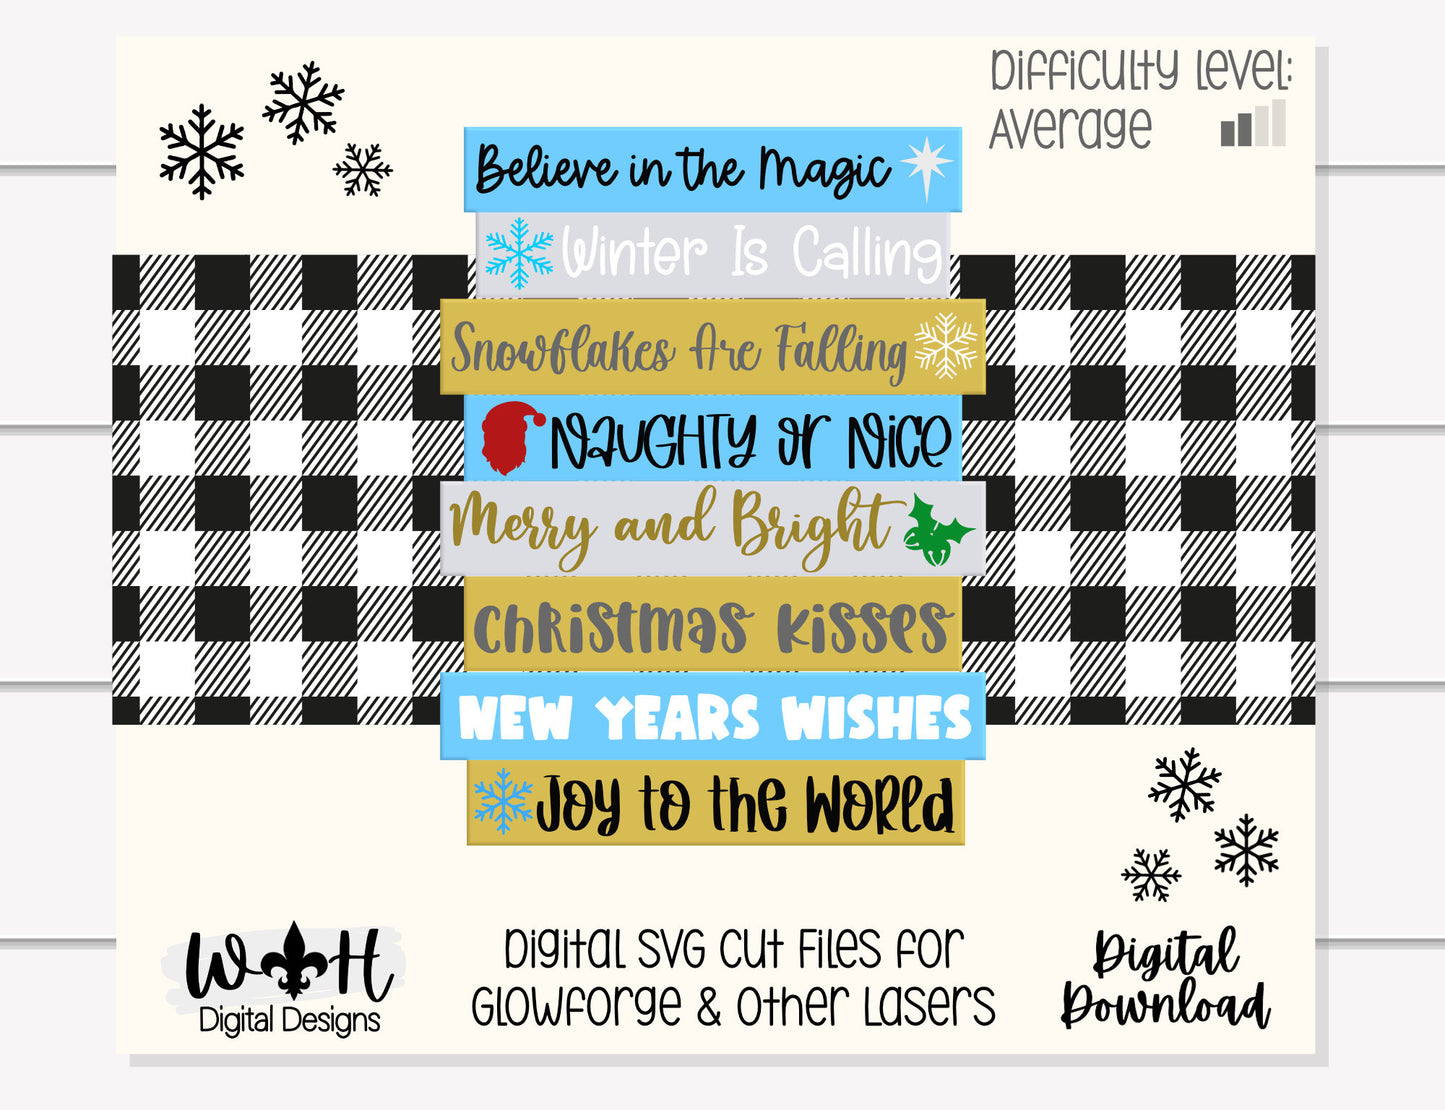 Believe In The Magic Holiday Bucket List Stacked Sign - Seasonal Wall Decor and DIY Kits - Cut File For Glowforge Lasers - Digital SVG File